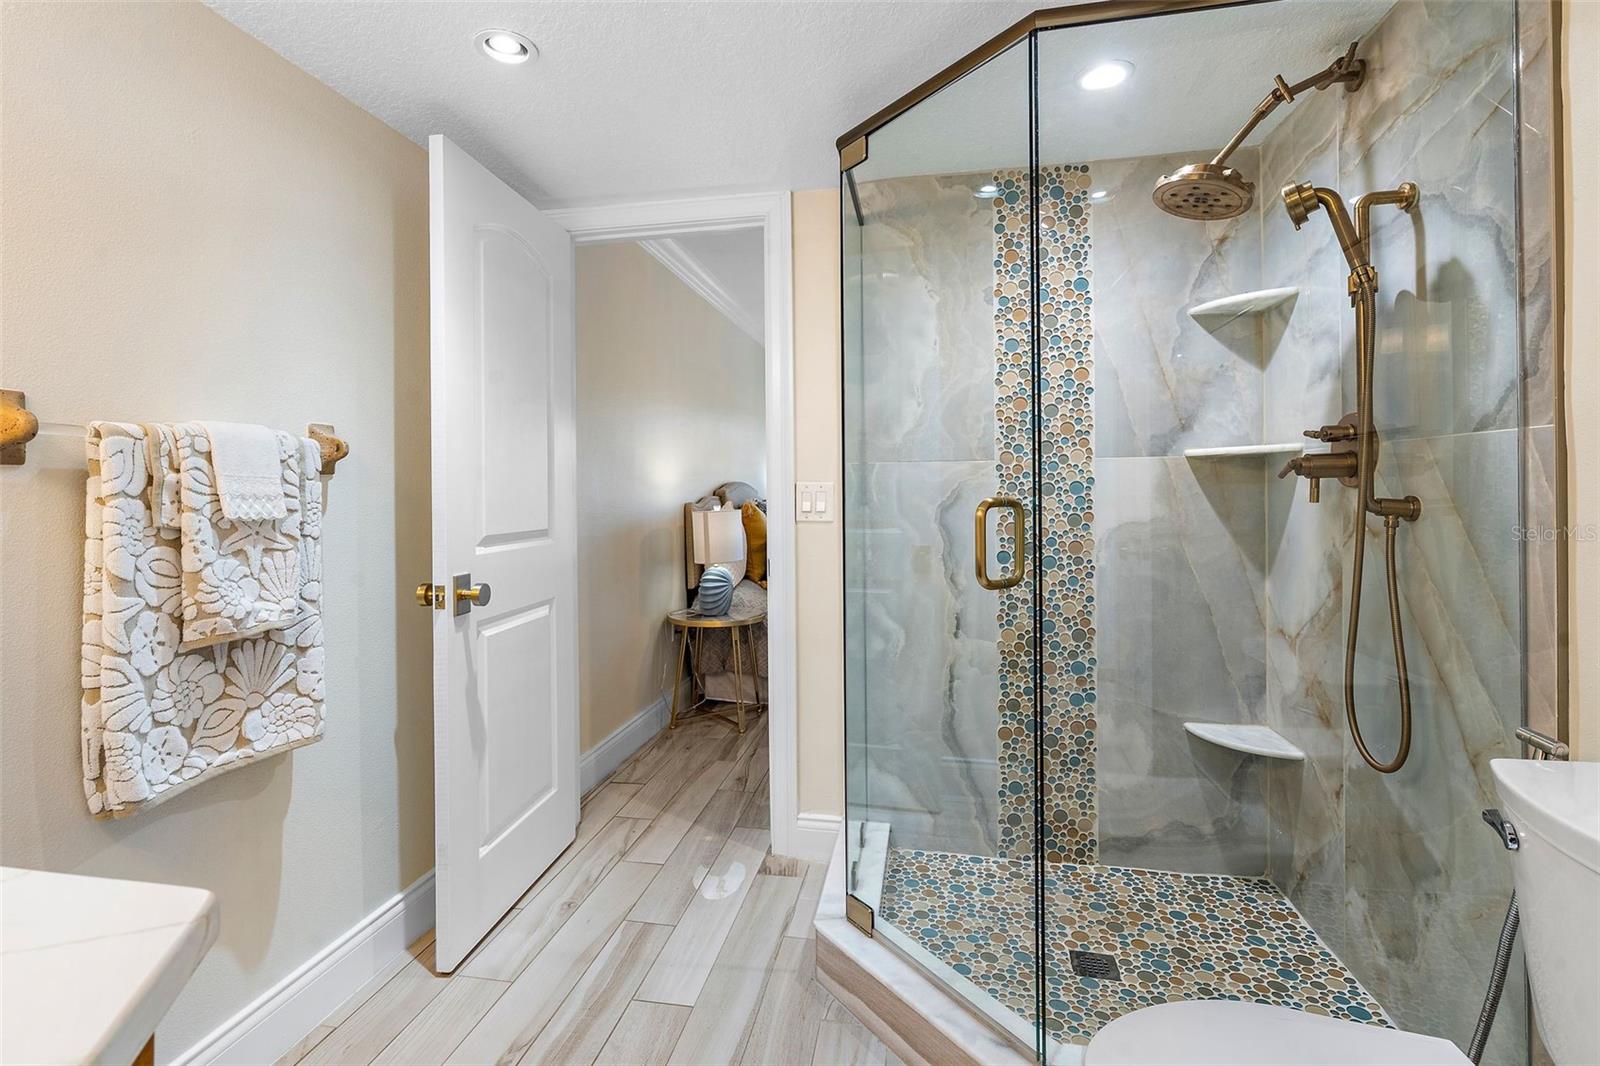 The stylish shower has just been remodeled in an elegant, yet beachy style.